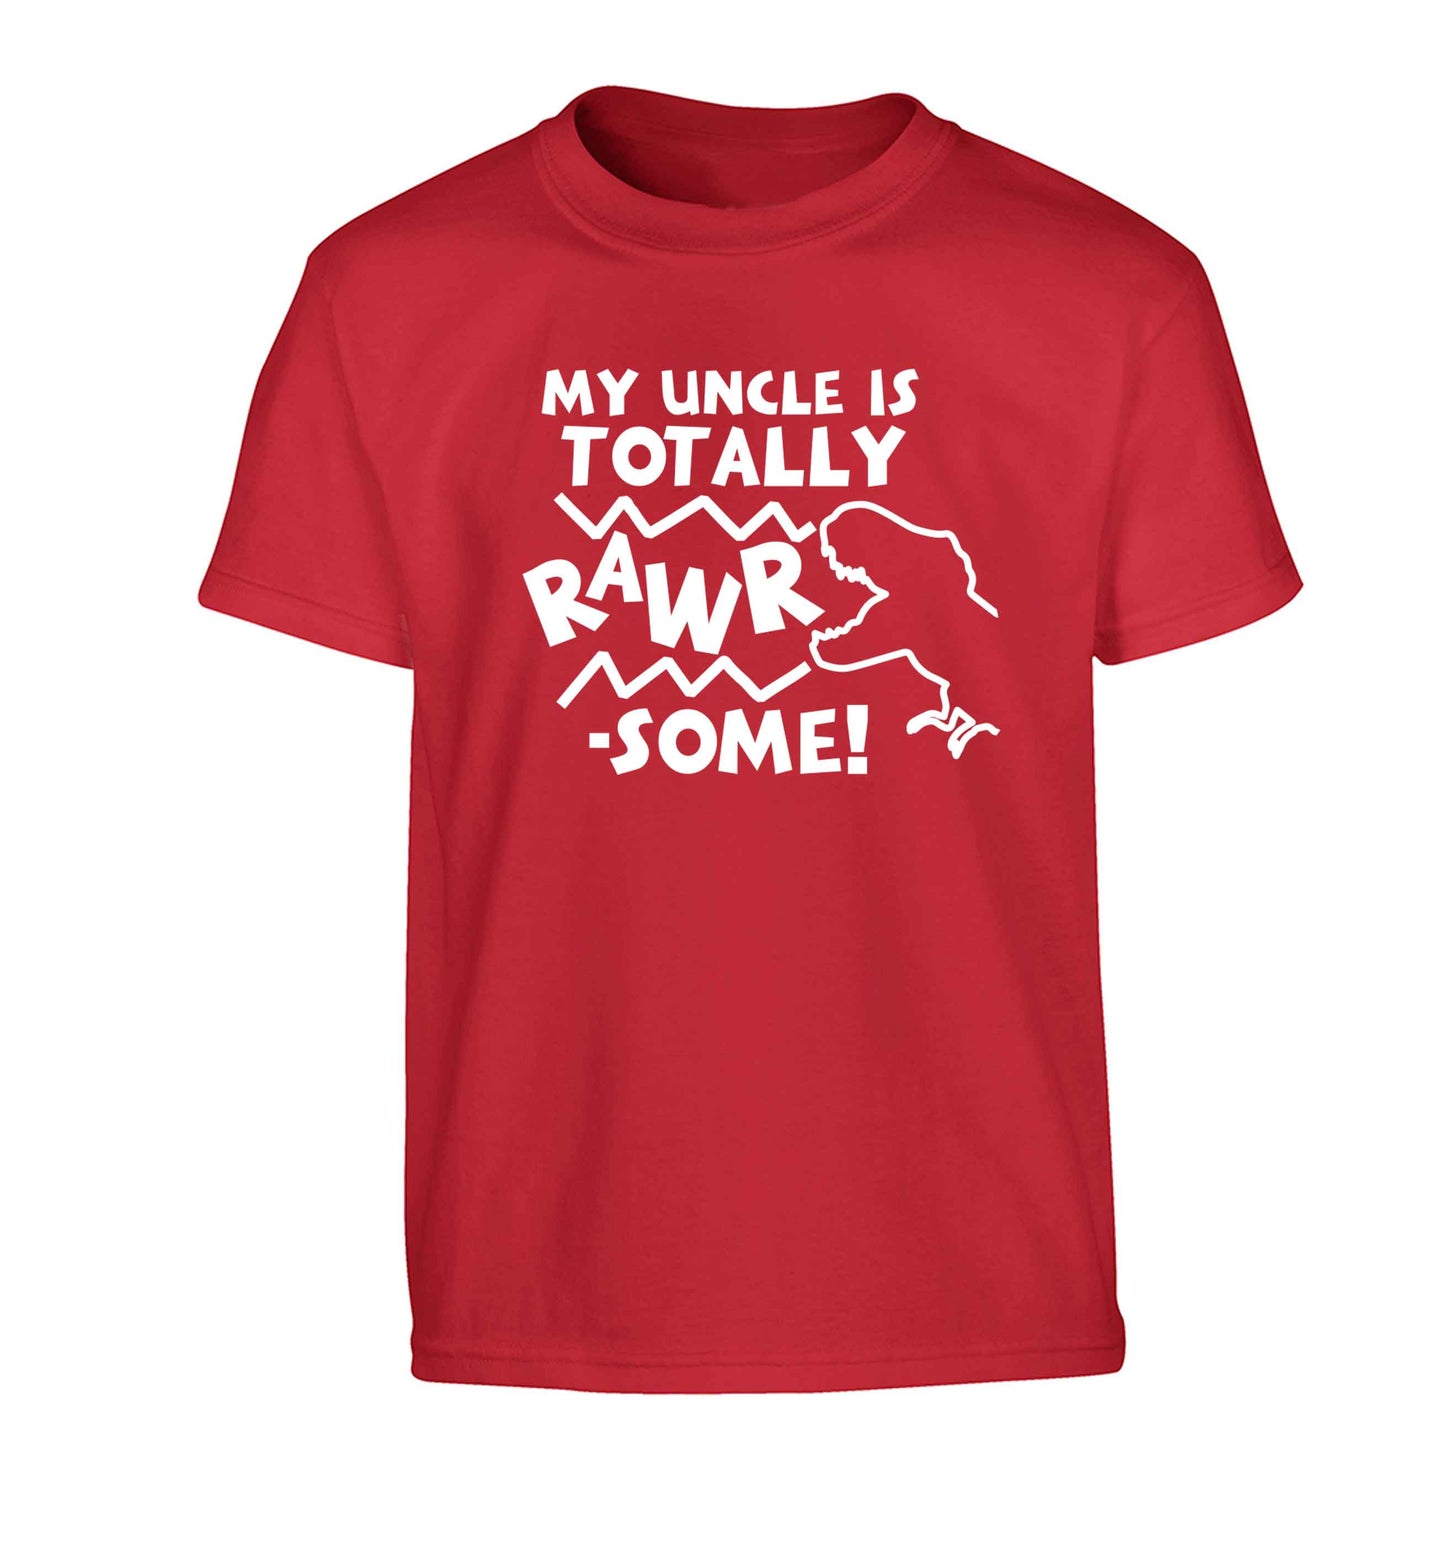 My uncle is totally rawrsome Children's red Tshirt 12-13 Years